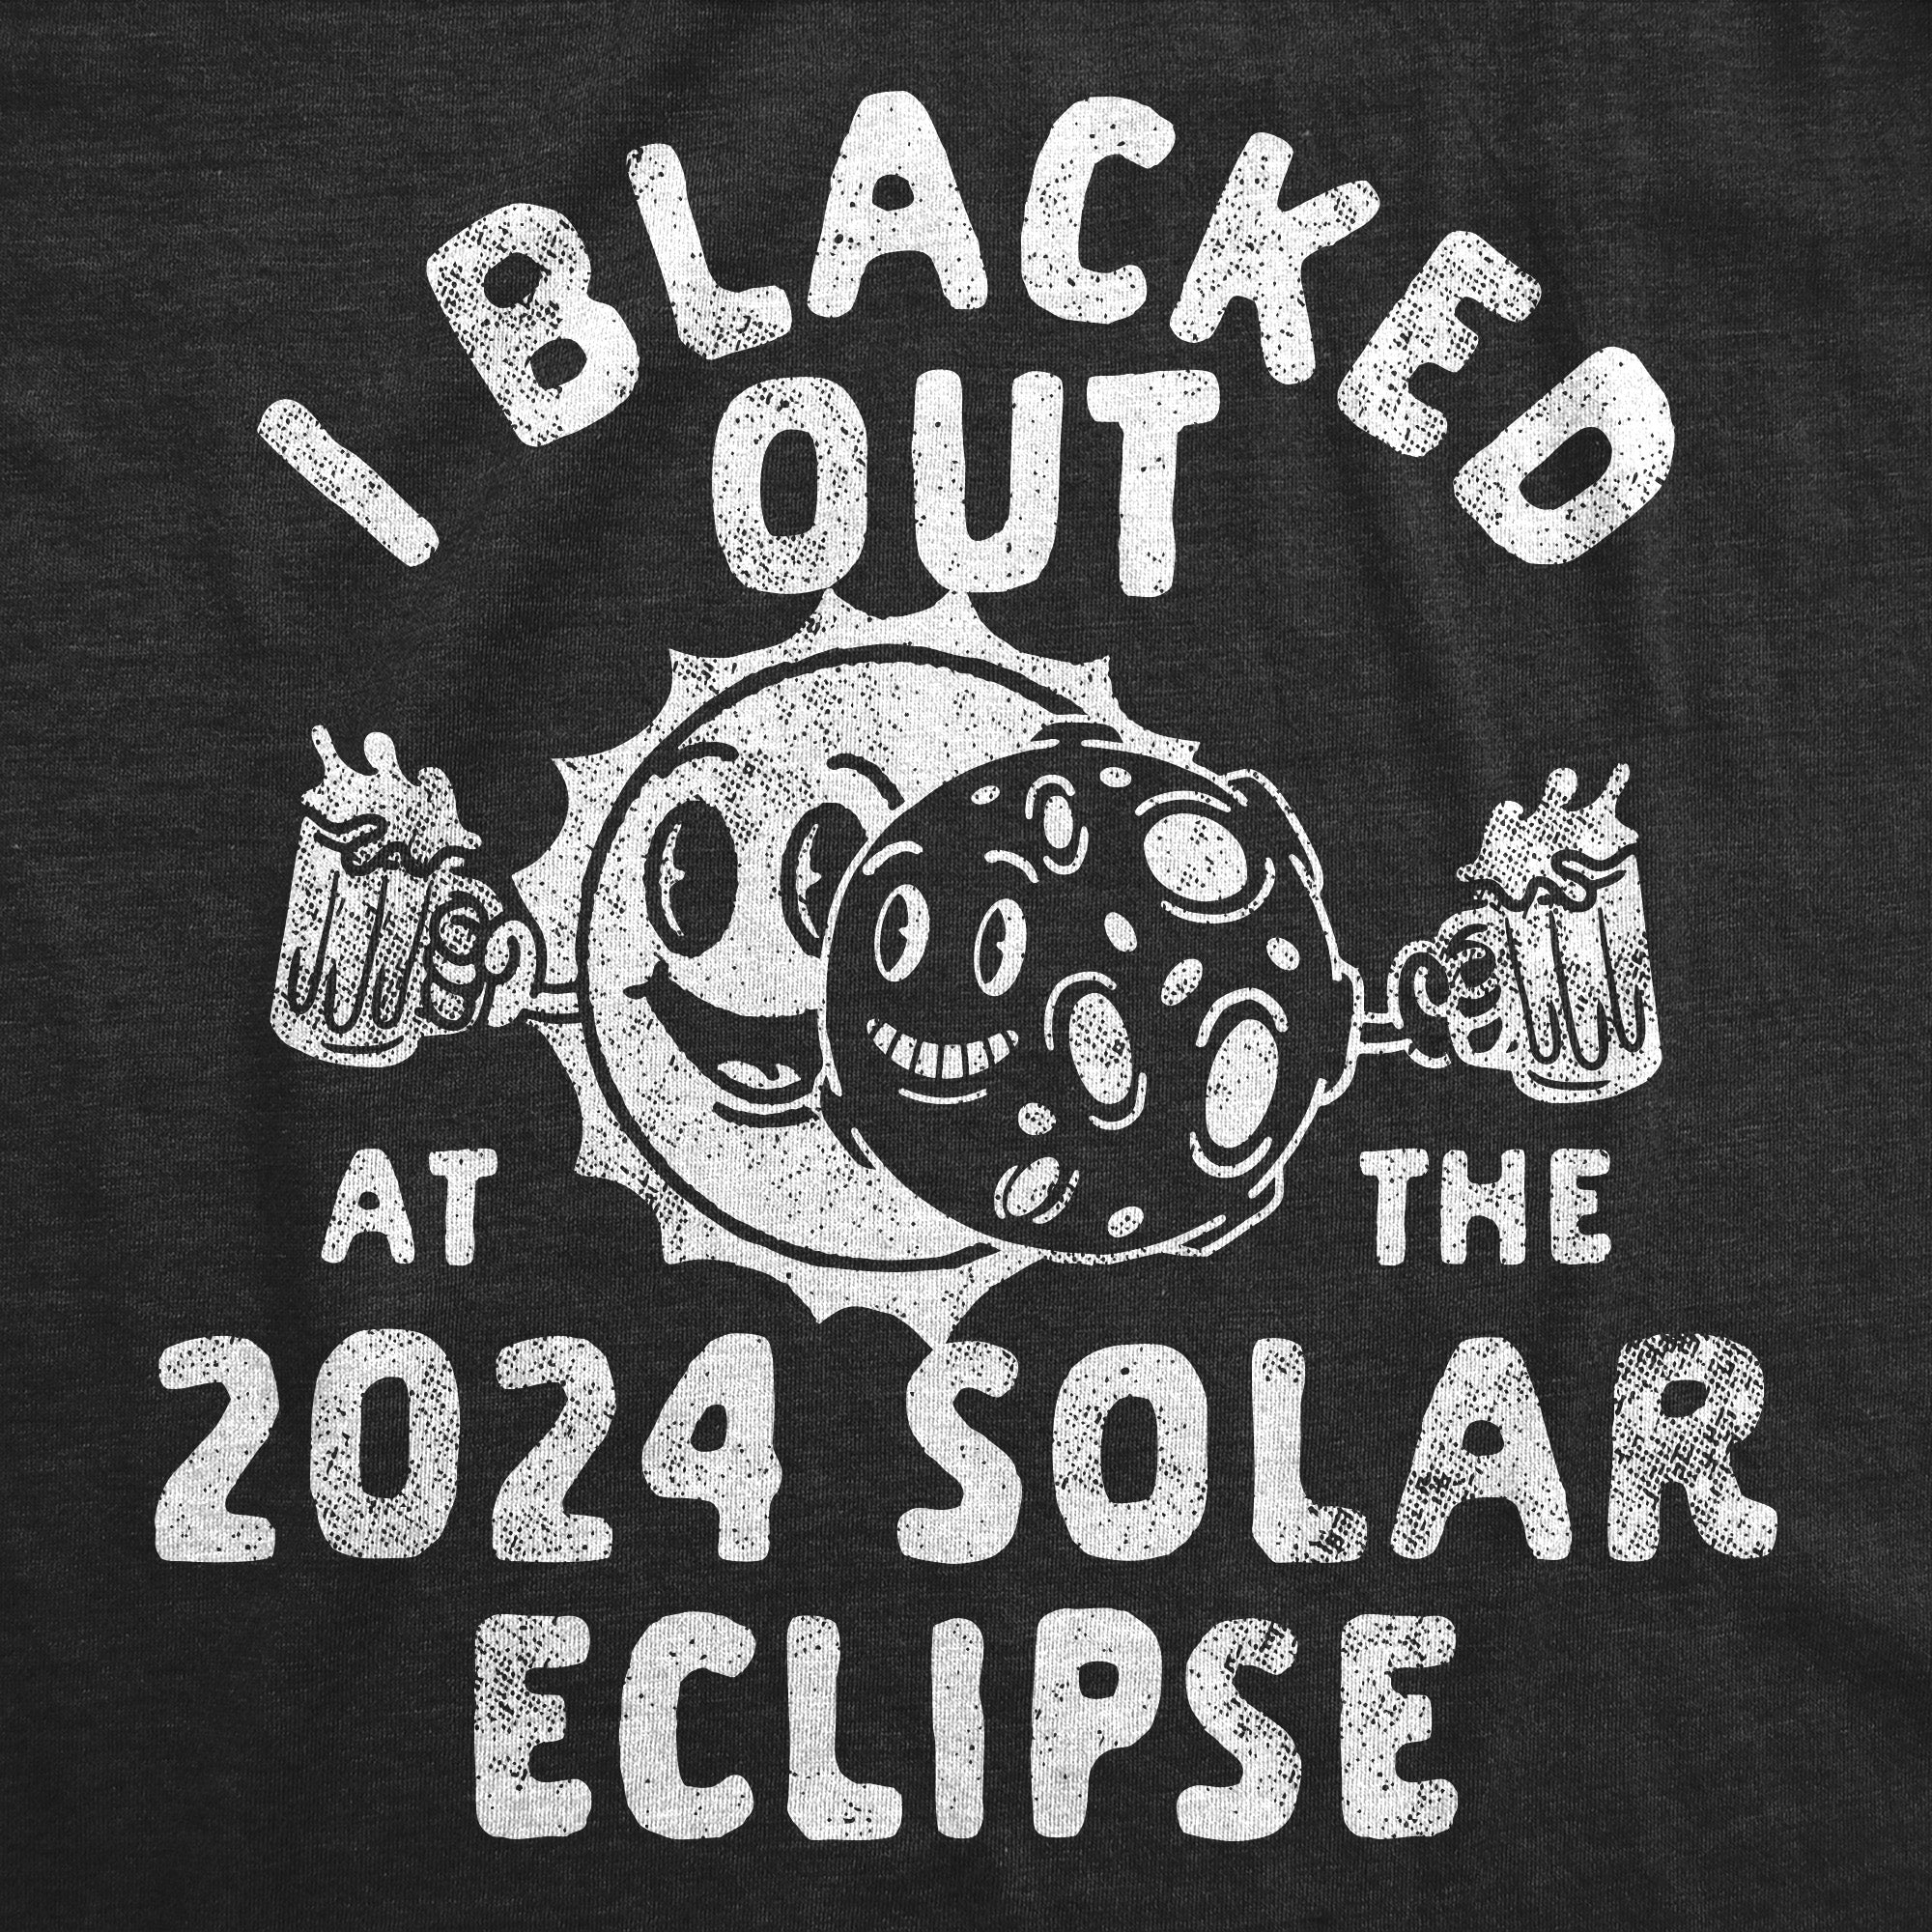 Funny Heather Black - 2024 Solar Eclipse I Blacked Out At The 2024 Solar Eclipse Mens T Shirt Nerdy Drinking sarcastic Tee